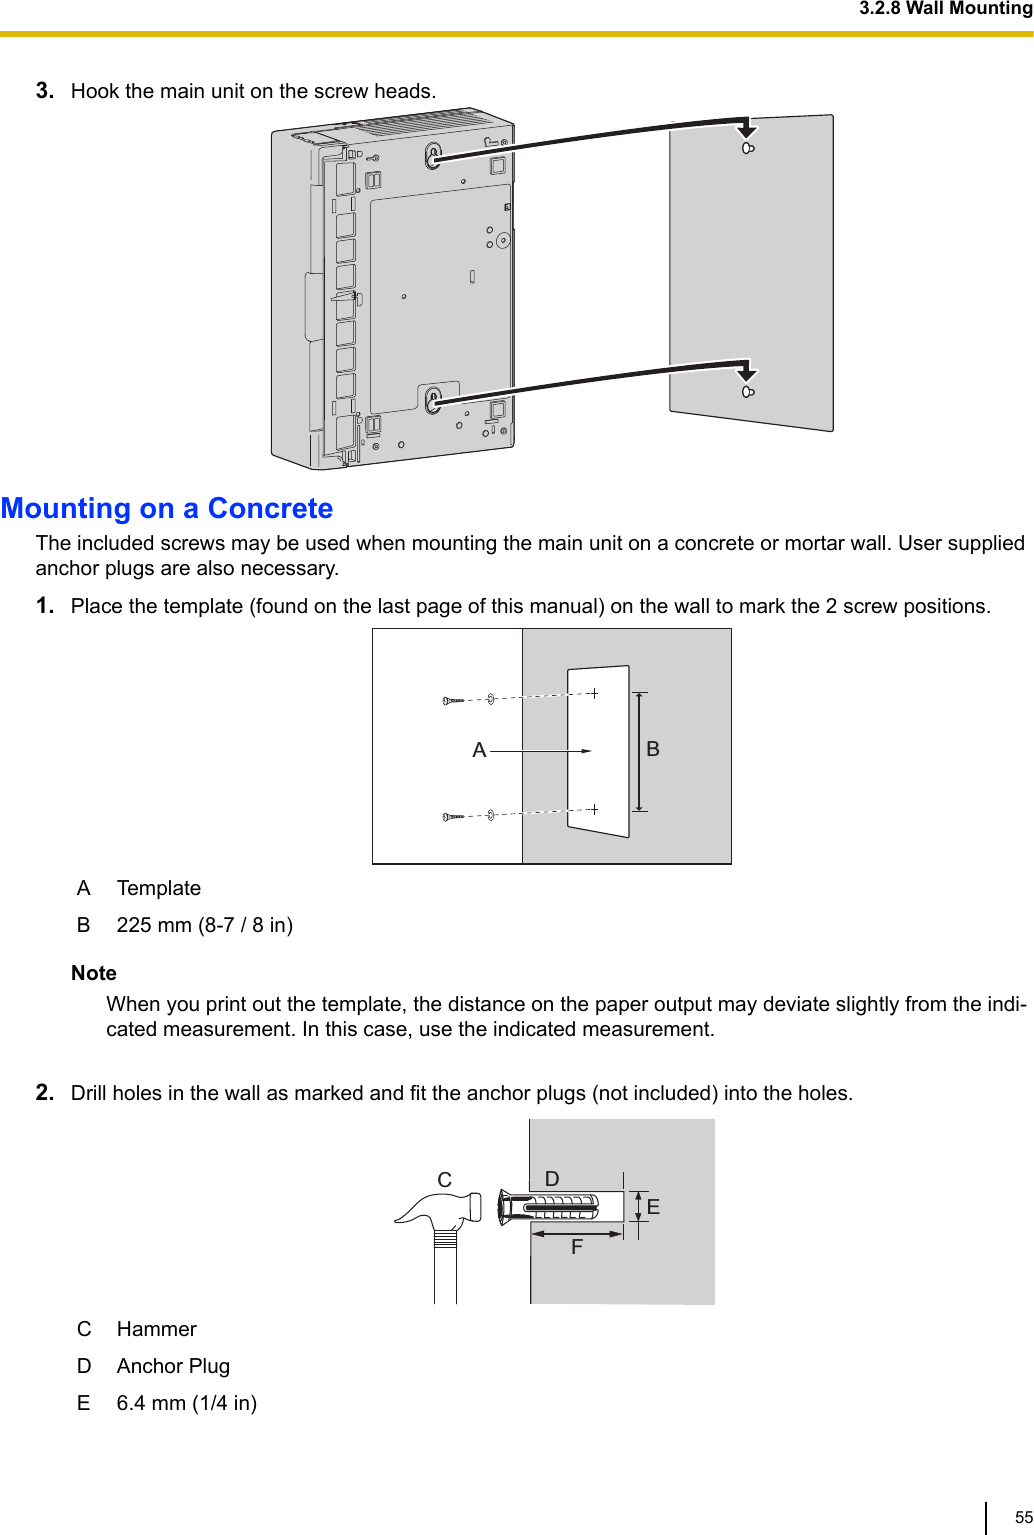 3. Hook the main unit on the screw heads.Mounting on a ConcreteThe included screws may be used when mounting the main unit on a concrete or mortar wall. User suppliedanchor plugs are also necessary.1. Place the template (found on the last page of this manual) on the wall to mark the 2 screw positions.ABA TemplateB 225 mm (8-7 / 8 in)NoteWhen you print out the template, the distance on the paper output may deviate slightly from the indi-cated measurement. In this case, use the indicated measurement. 2. Drill holes in the wall as marked and fit the anchor plugs (not included) into the holes.CDEFC HammerD Anchor PlugE 6.4 mm (1/4 in)3.2.8 Wall Mounting55